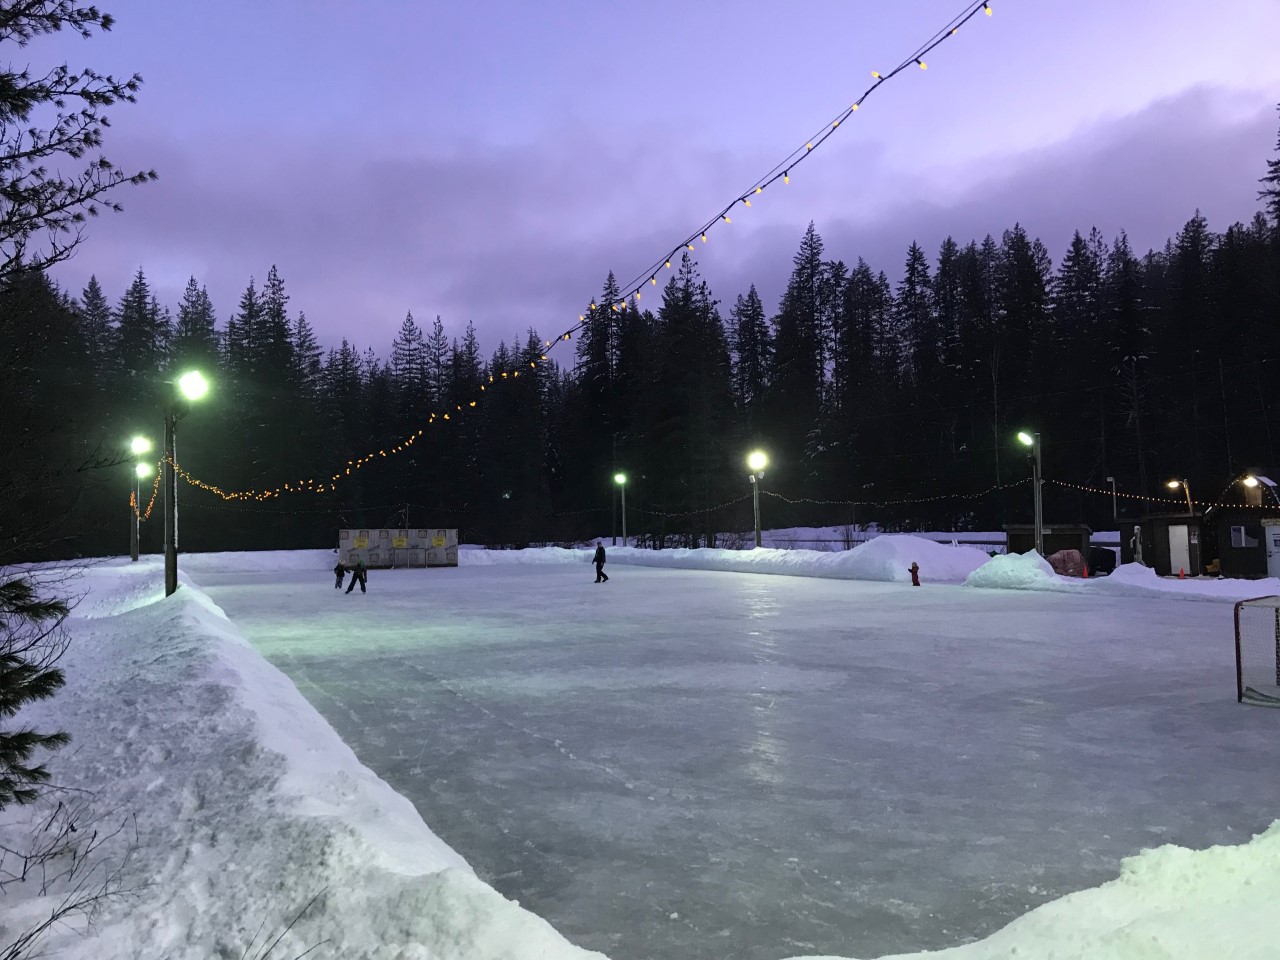 Farrells Field Rink: Farrells Field Rink is a free community ice rink located in the North Shuswap. Grounds include a heated skate shack, flood lights, music system, and hockey nets. Get out on […]